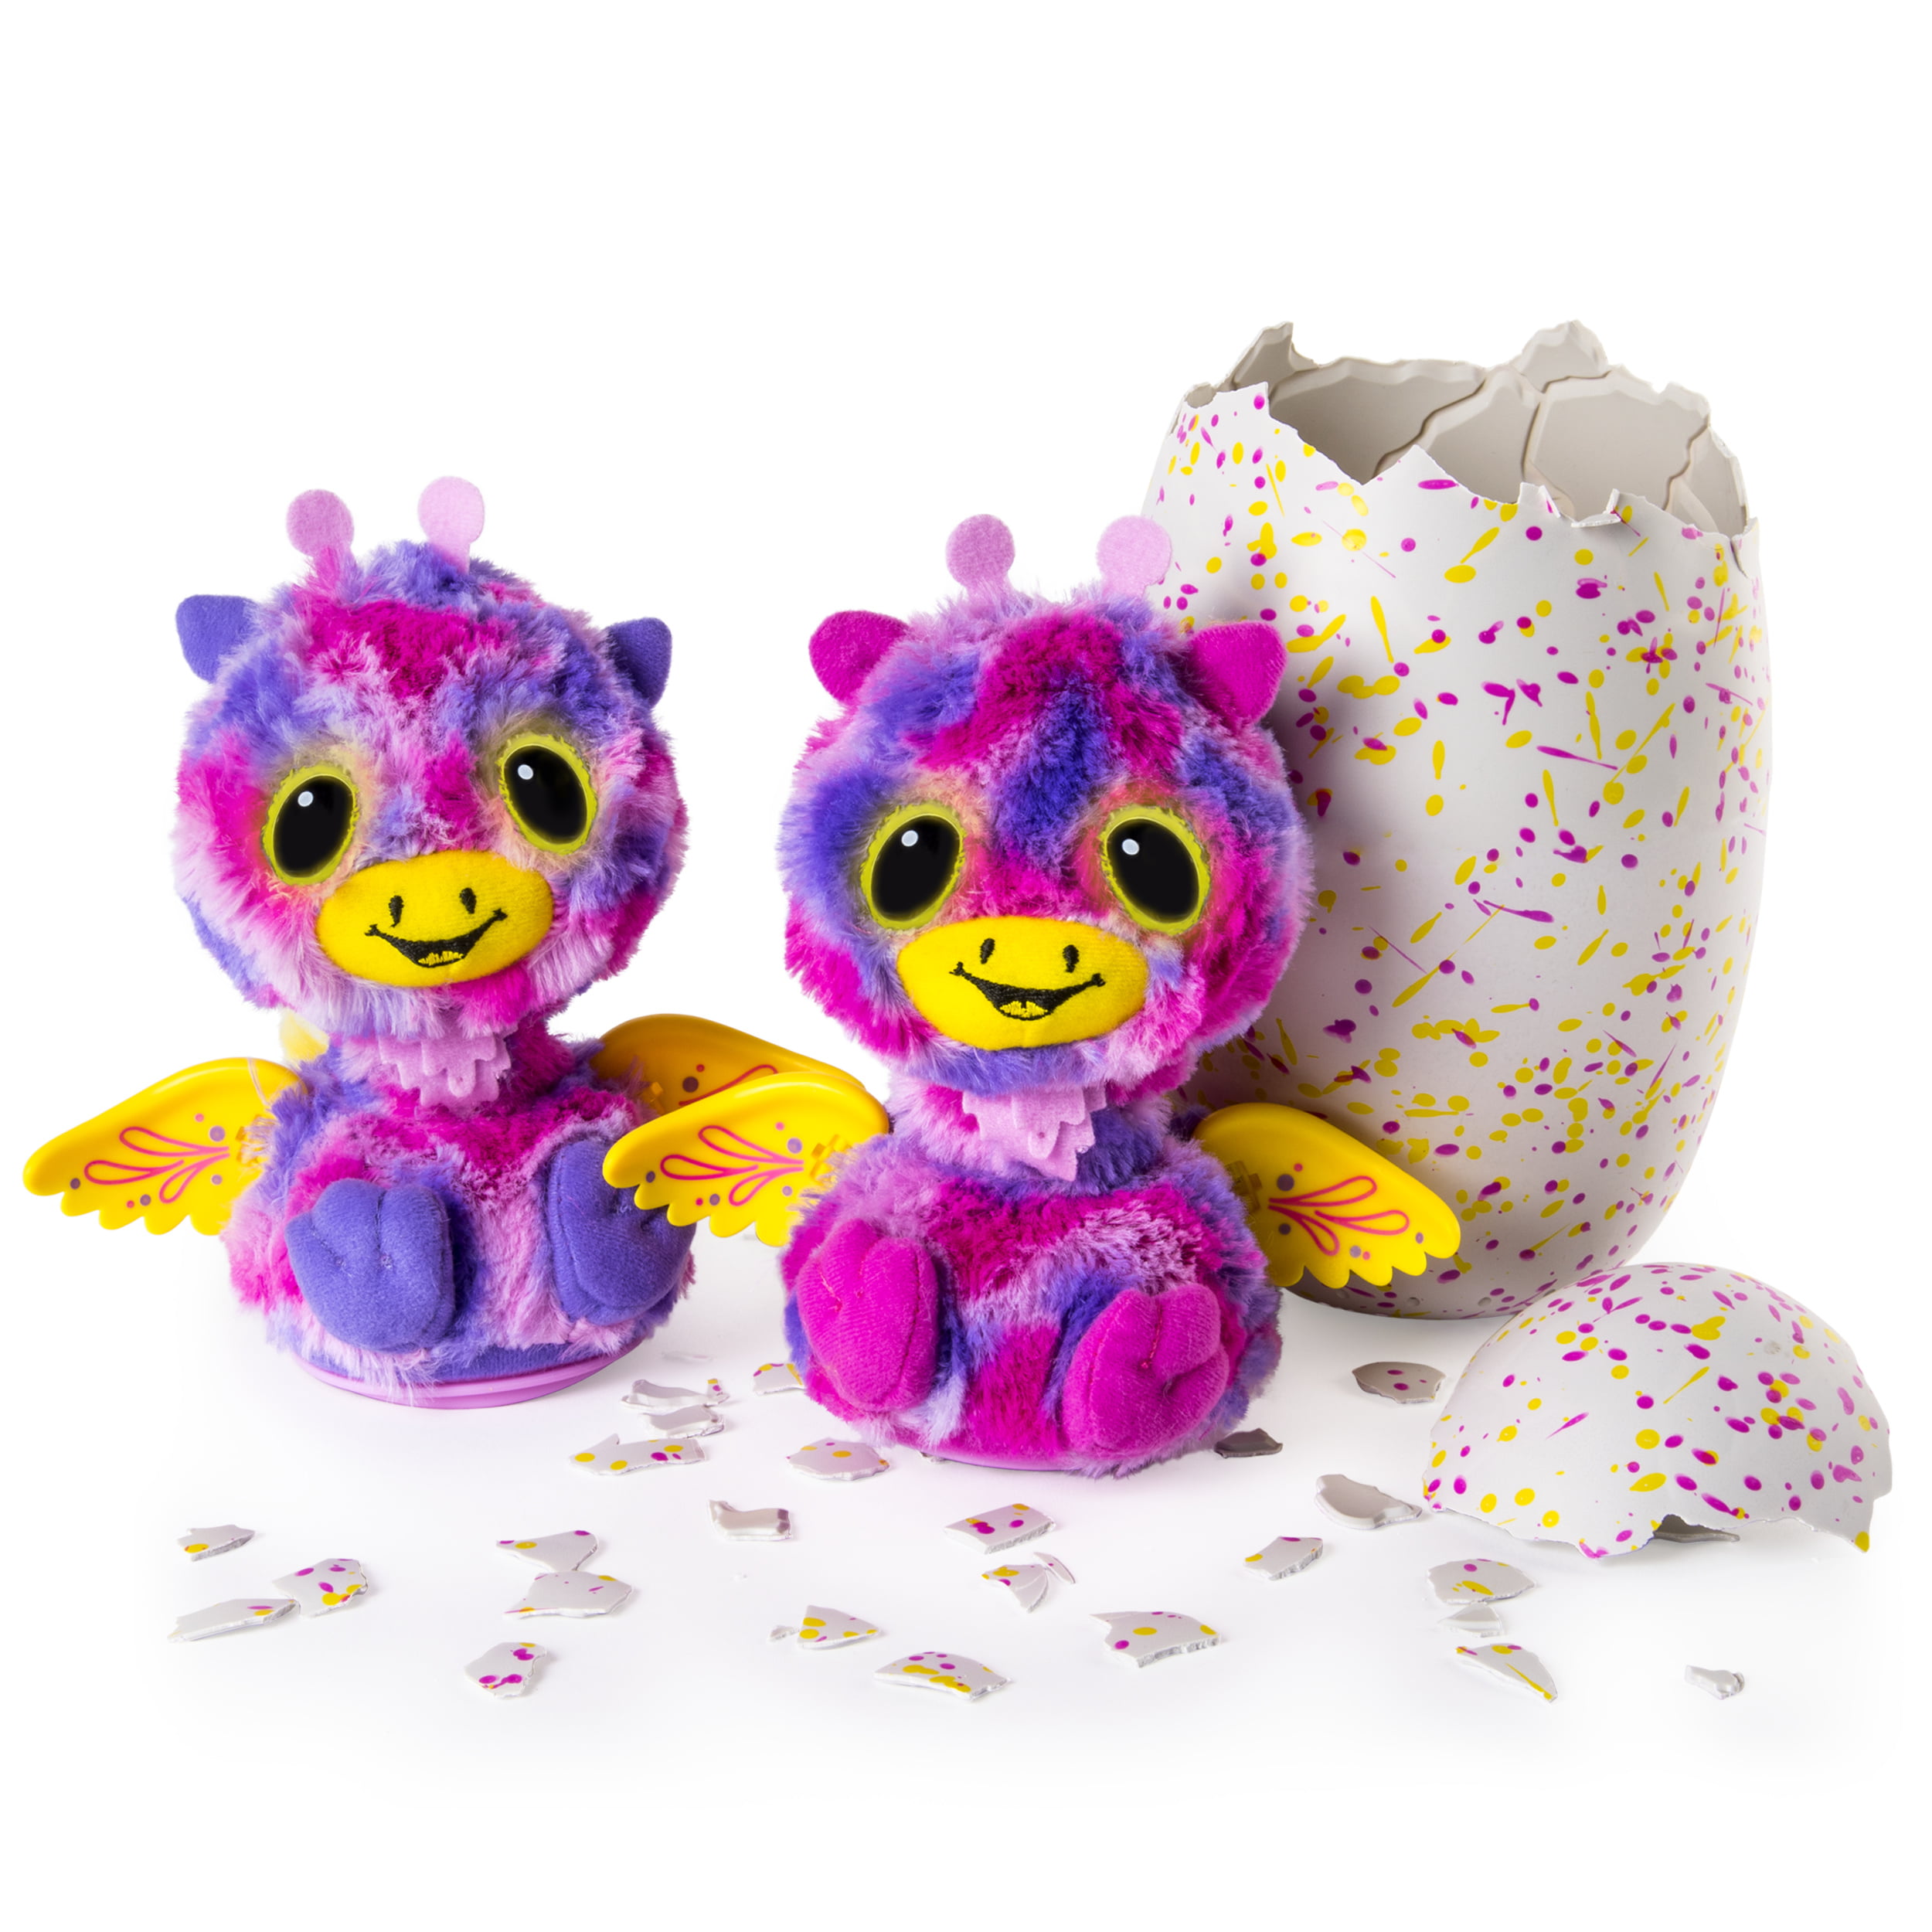 HATCHIMAL SUPRISE Twins in Egg Interactive Hatching Toy SALE NOW $79.96 